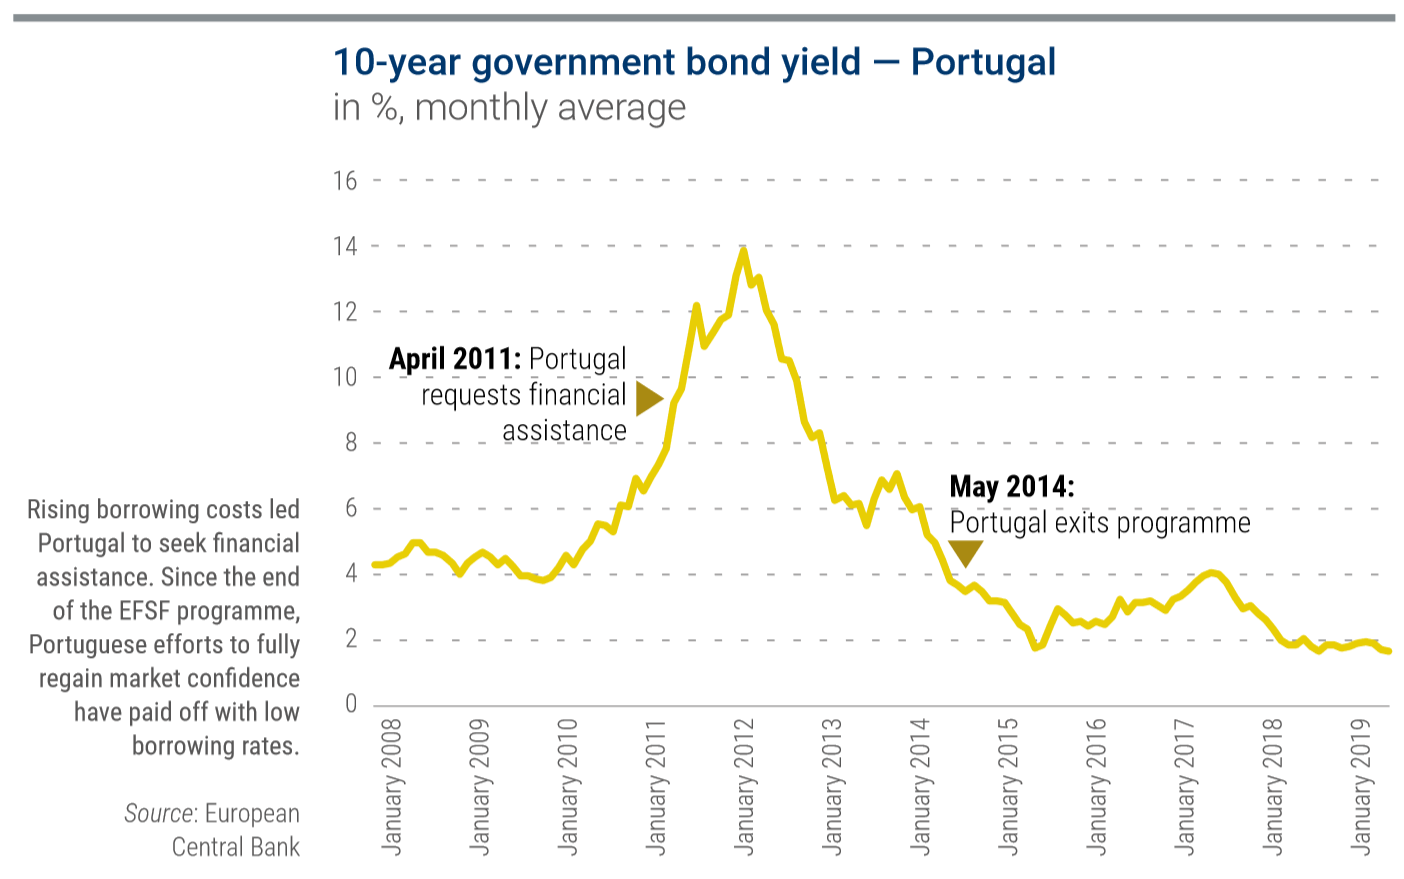 Is Portugal A New Financial Crisis? Explained Via European Perspective